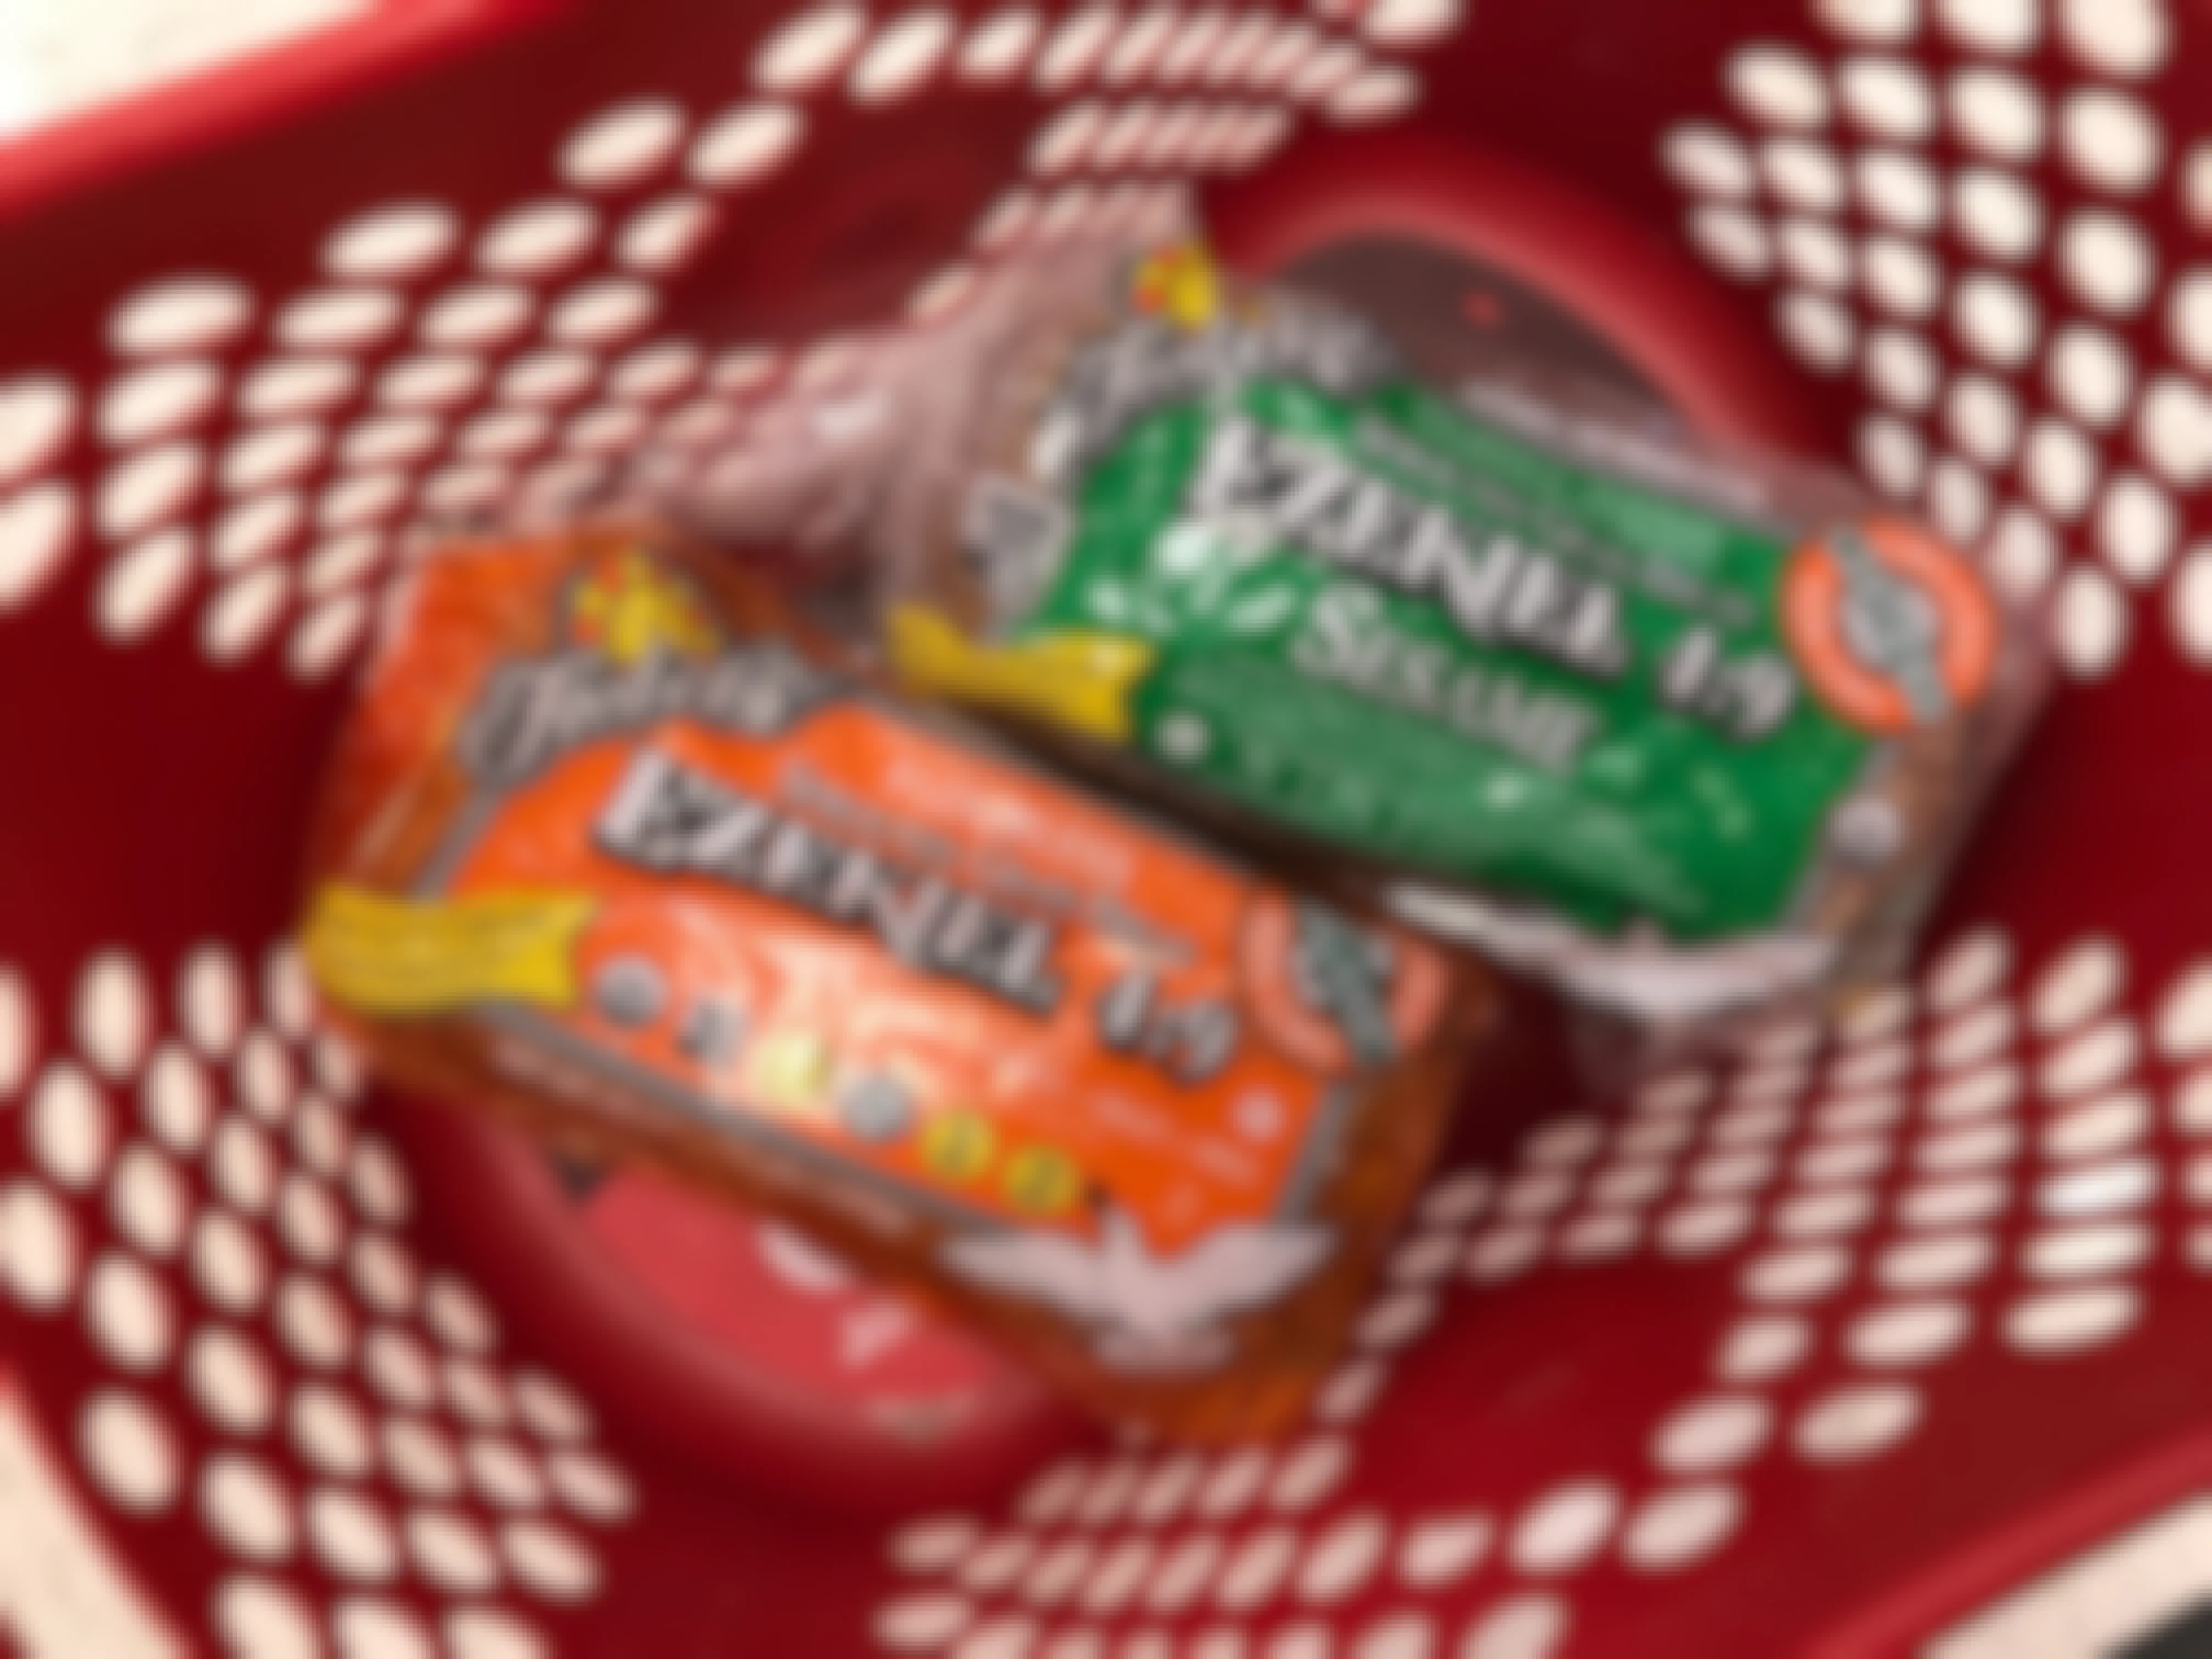 Which Store Has the Best Price for Ezekiel Bread?